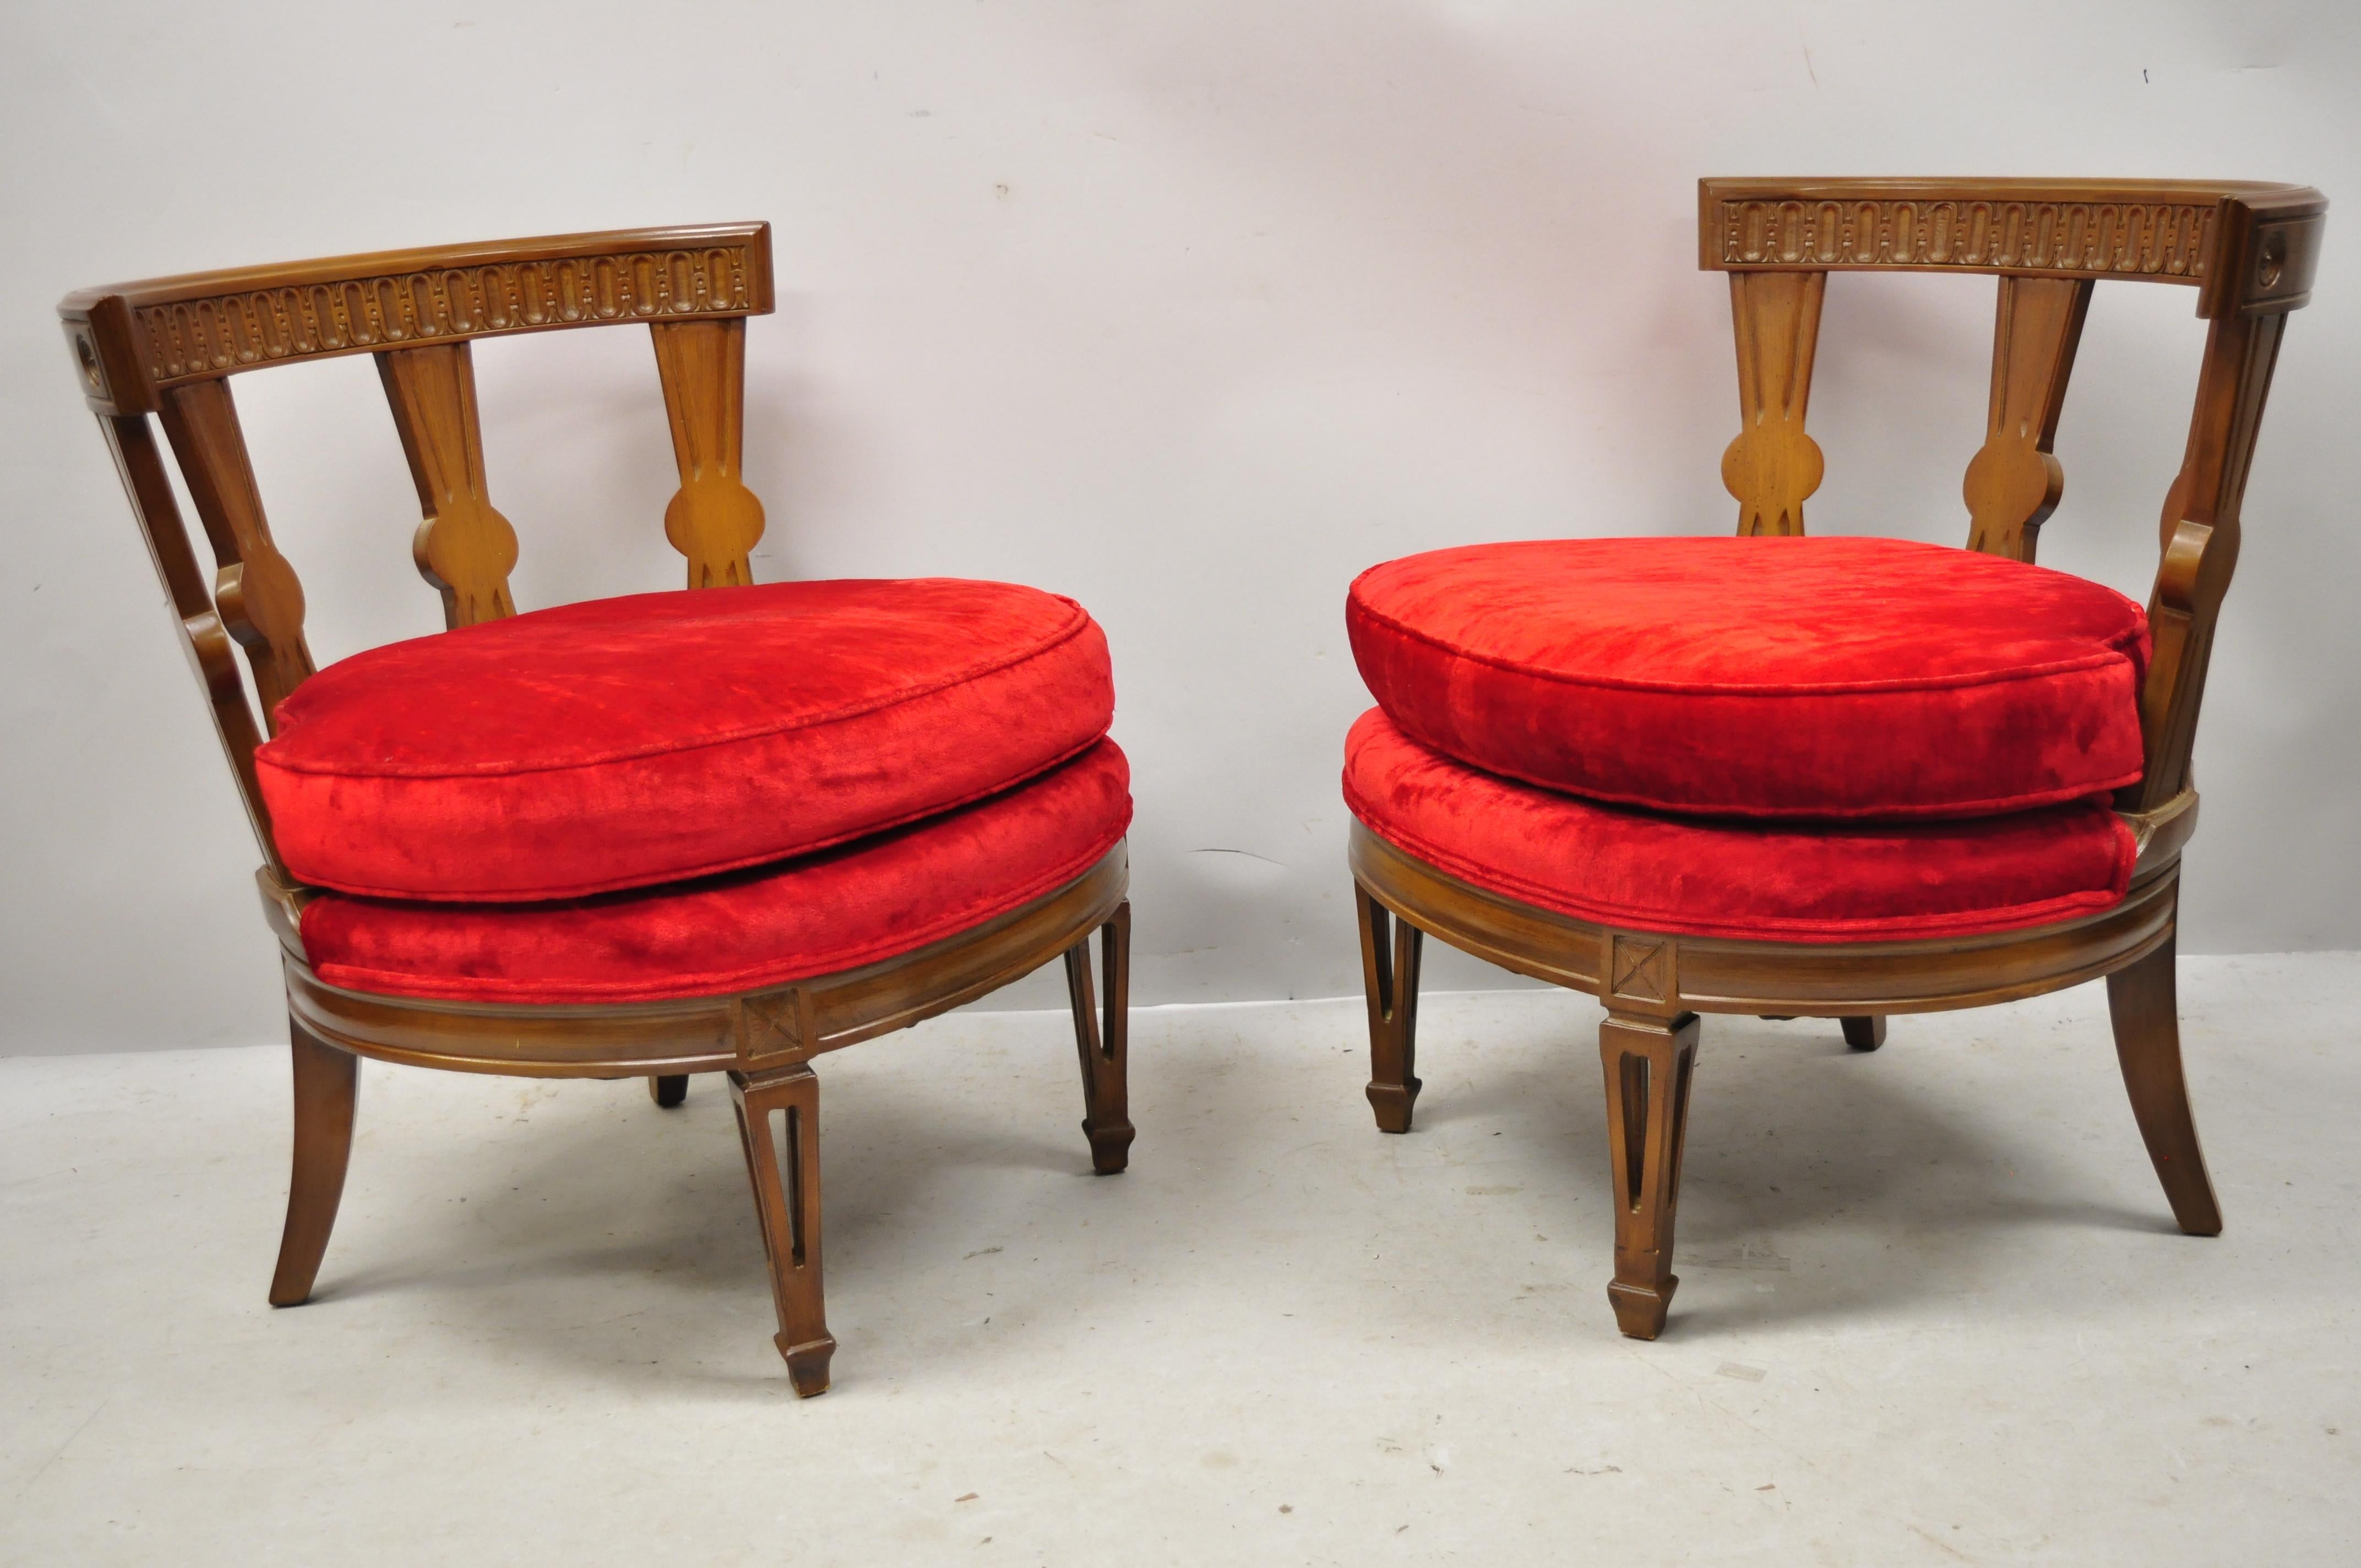 Hollywood Regency Italian Low Barrel Back Red Slipper Lounge Chairs - a Pair. Item features low wide tub seat frame, original crushed velvet red fabric, carved through legs, sleek barrel back, solid wood frame, original label, very nice vintage